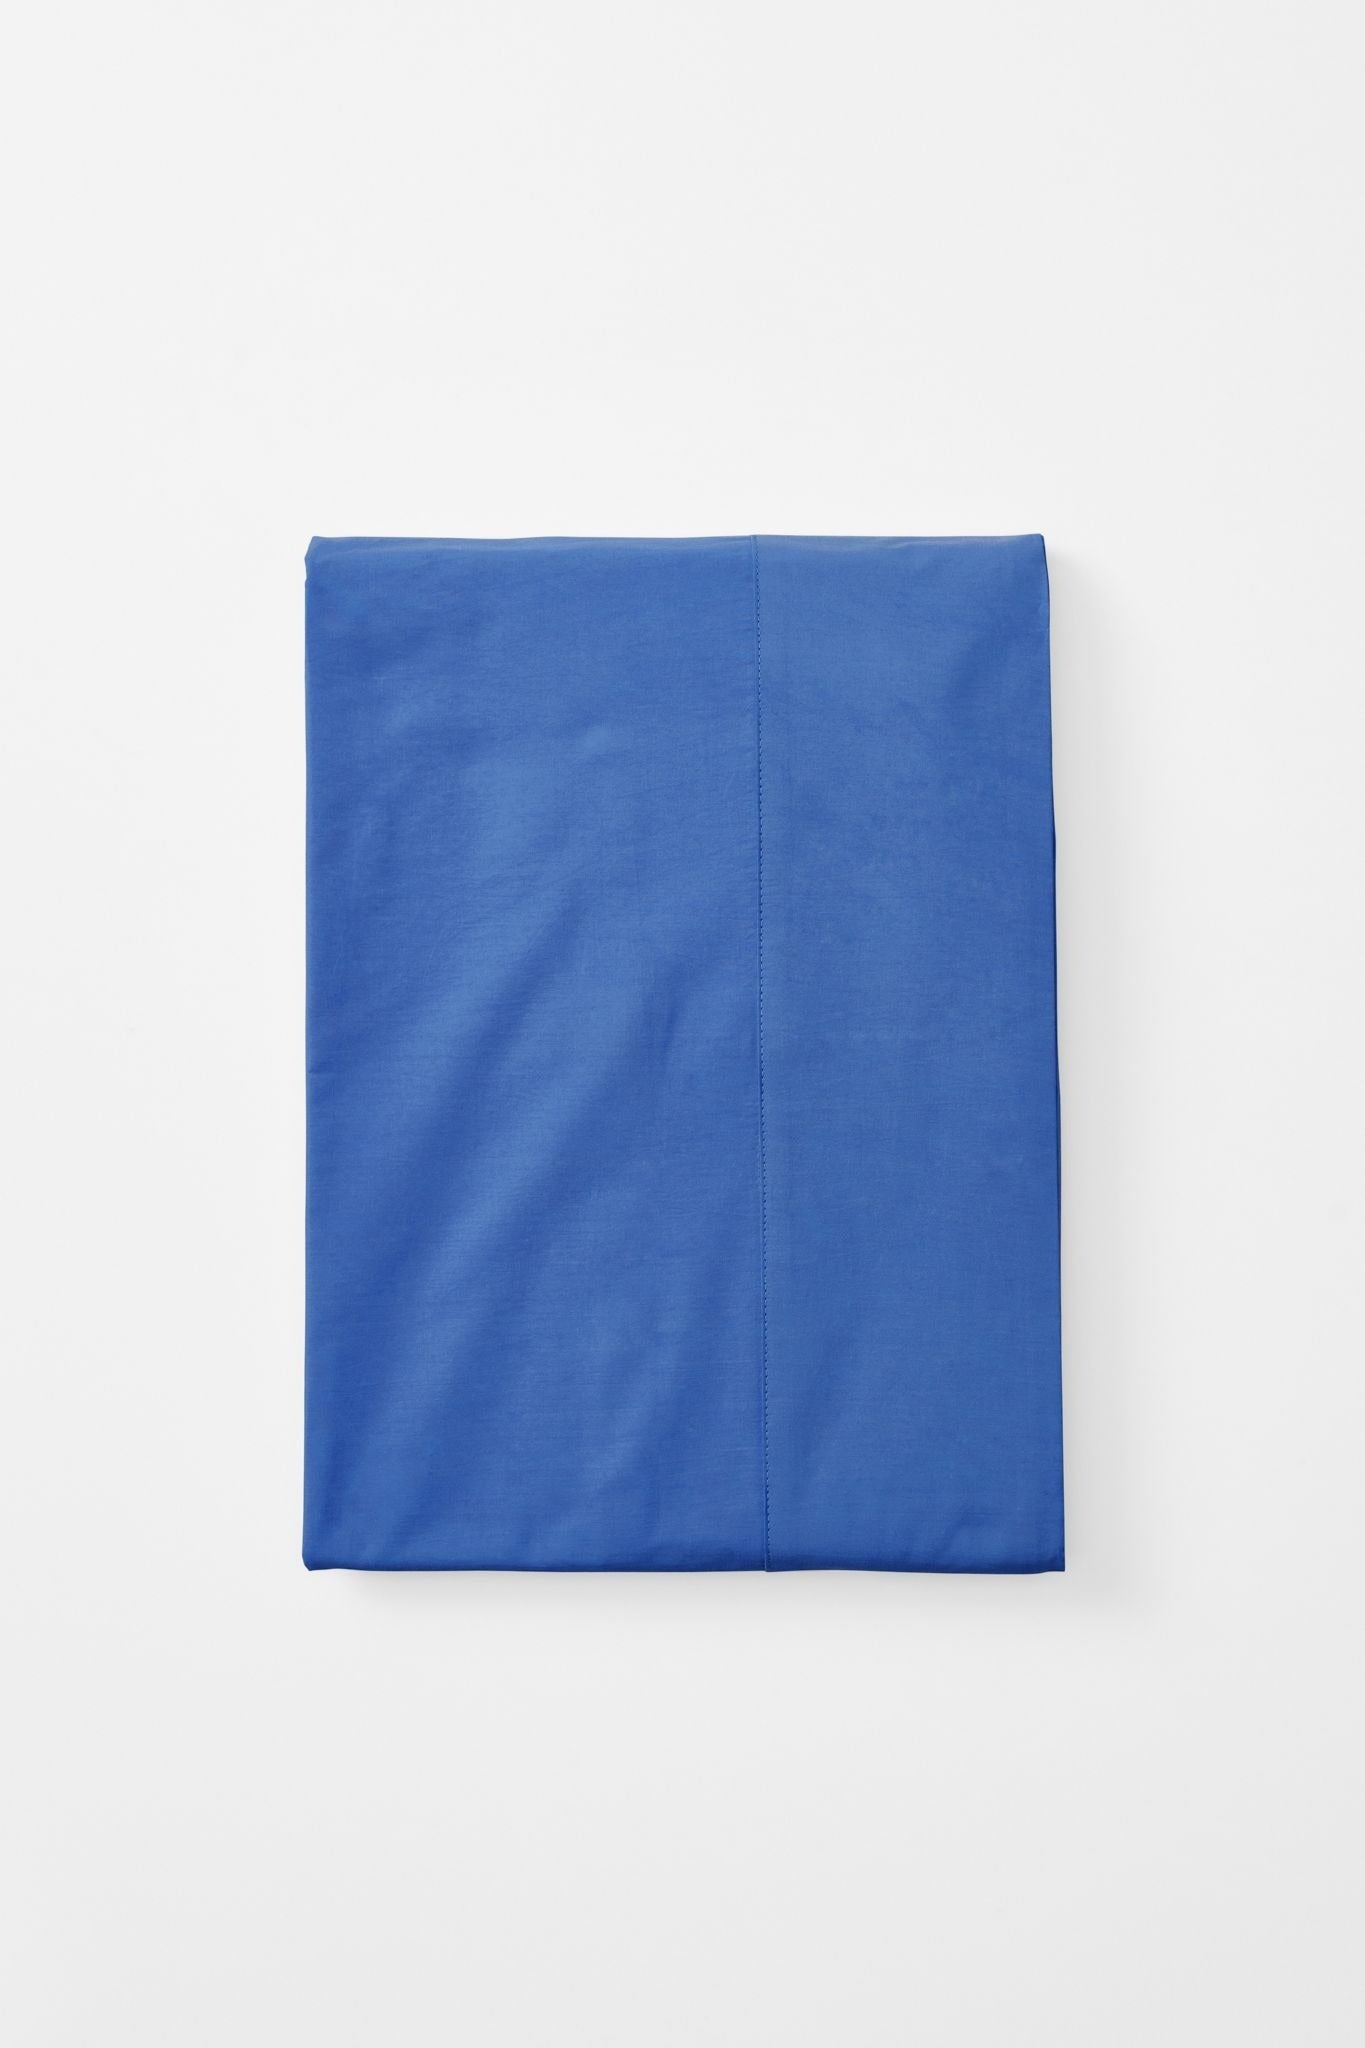 Mono Organic Cotton Percale Flat Sheet Bed Sheets in Blue Blue